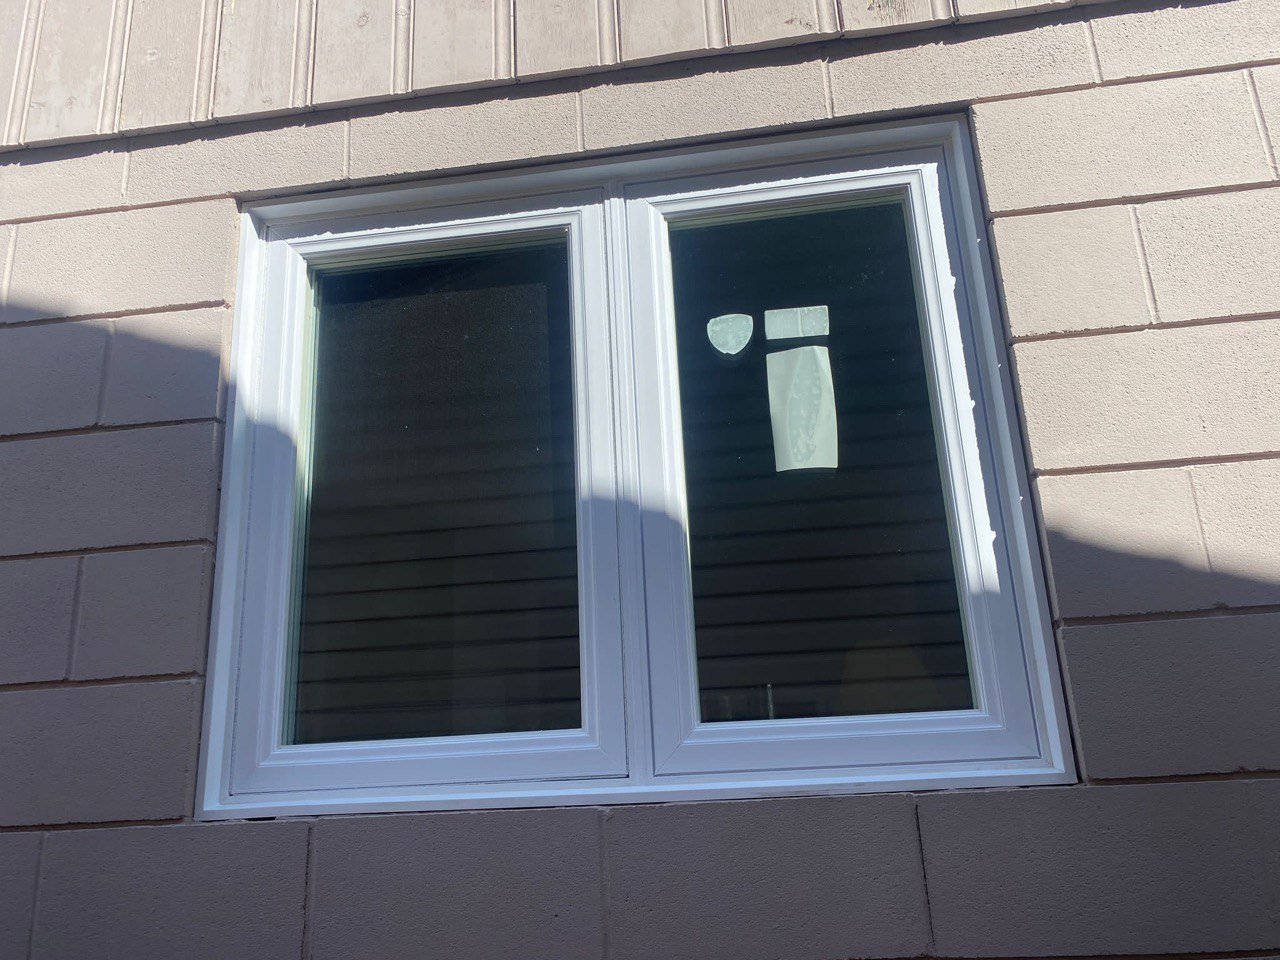 Window installation tips for Canadian DIYers